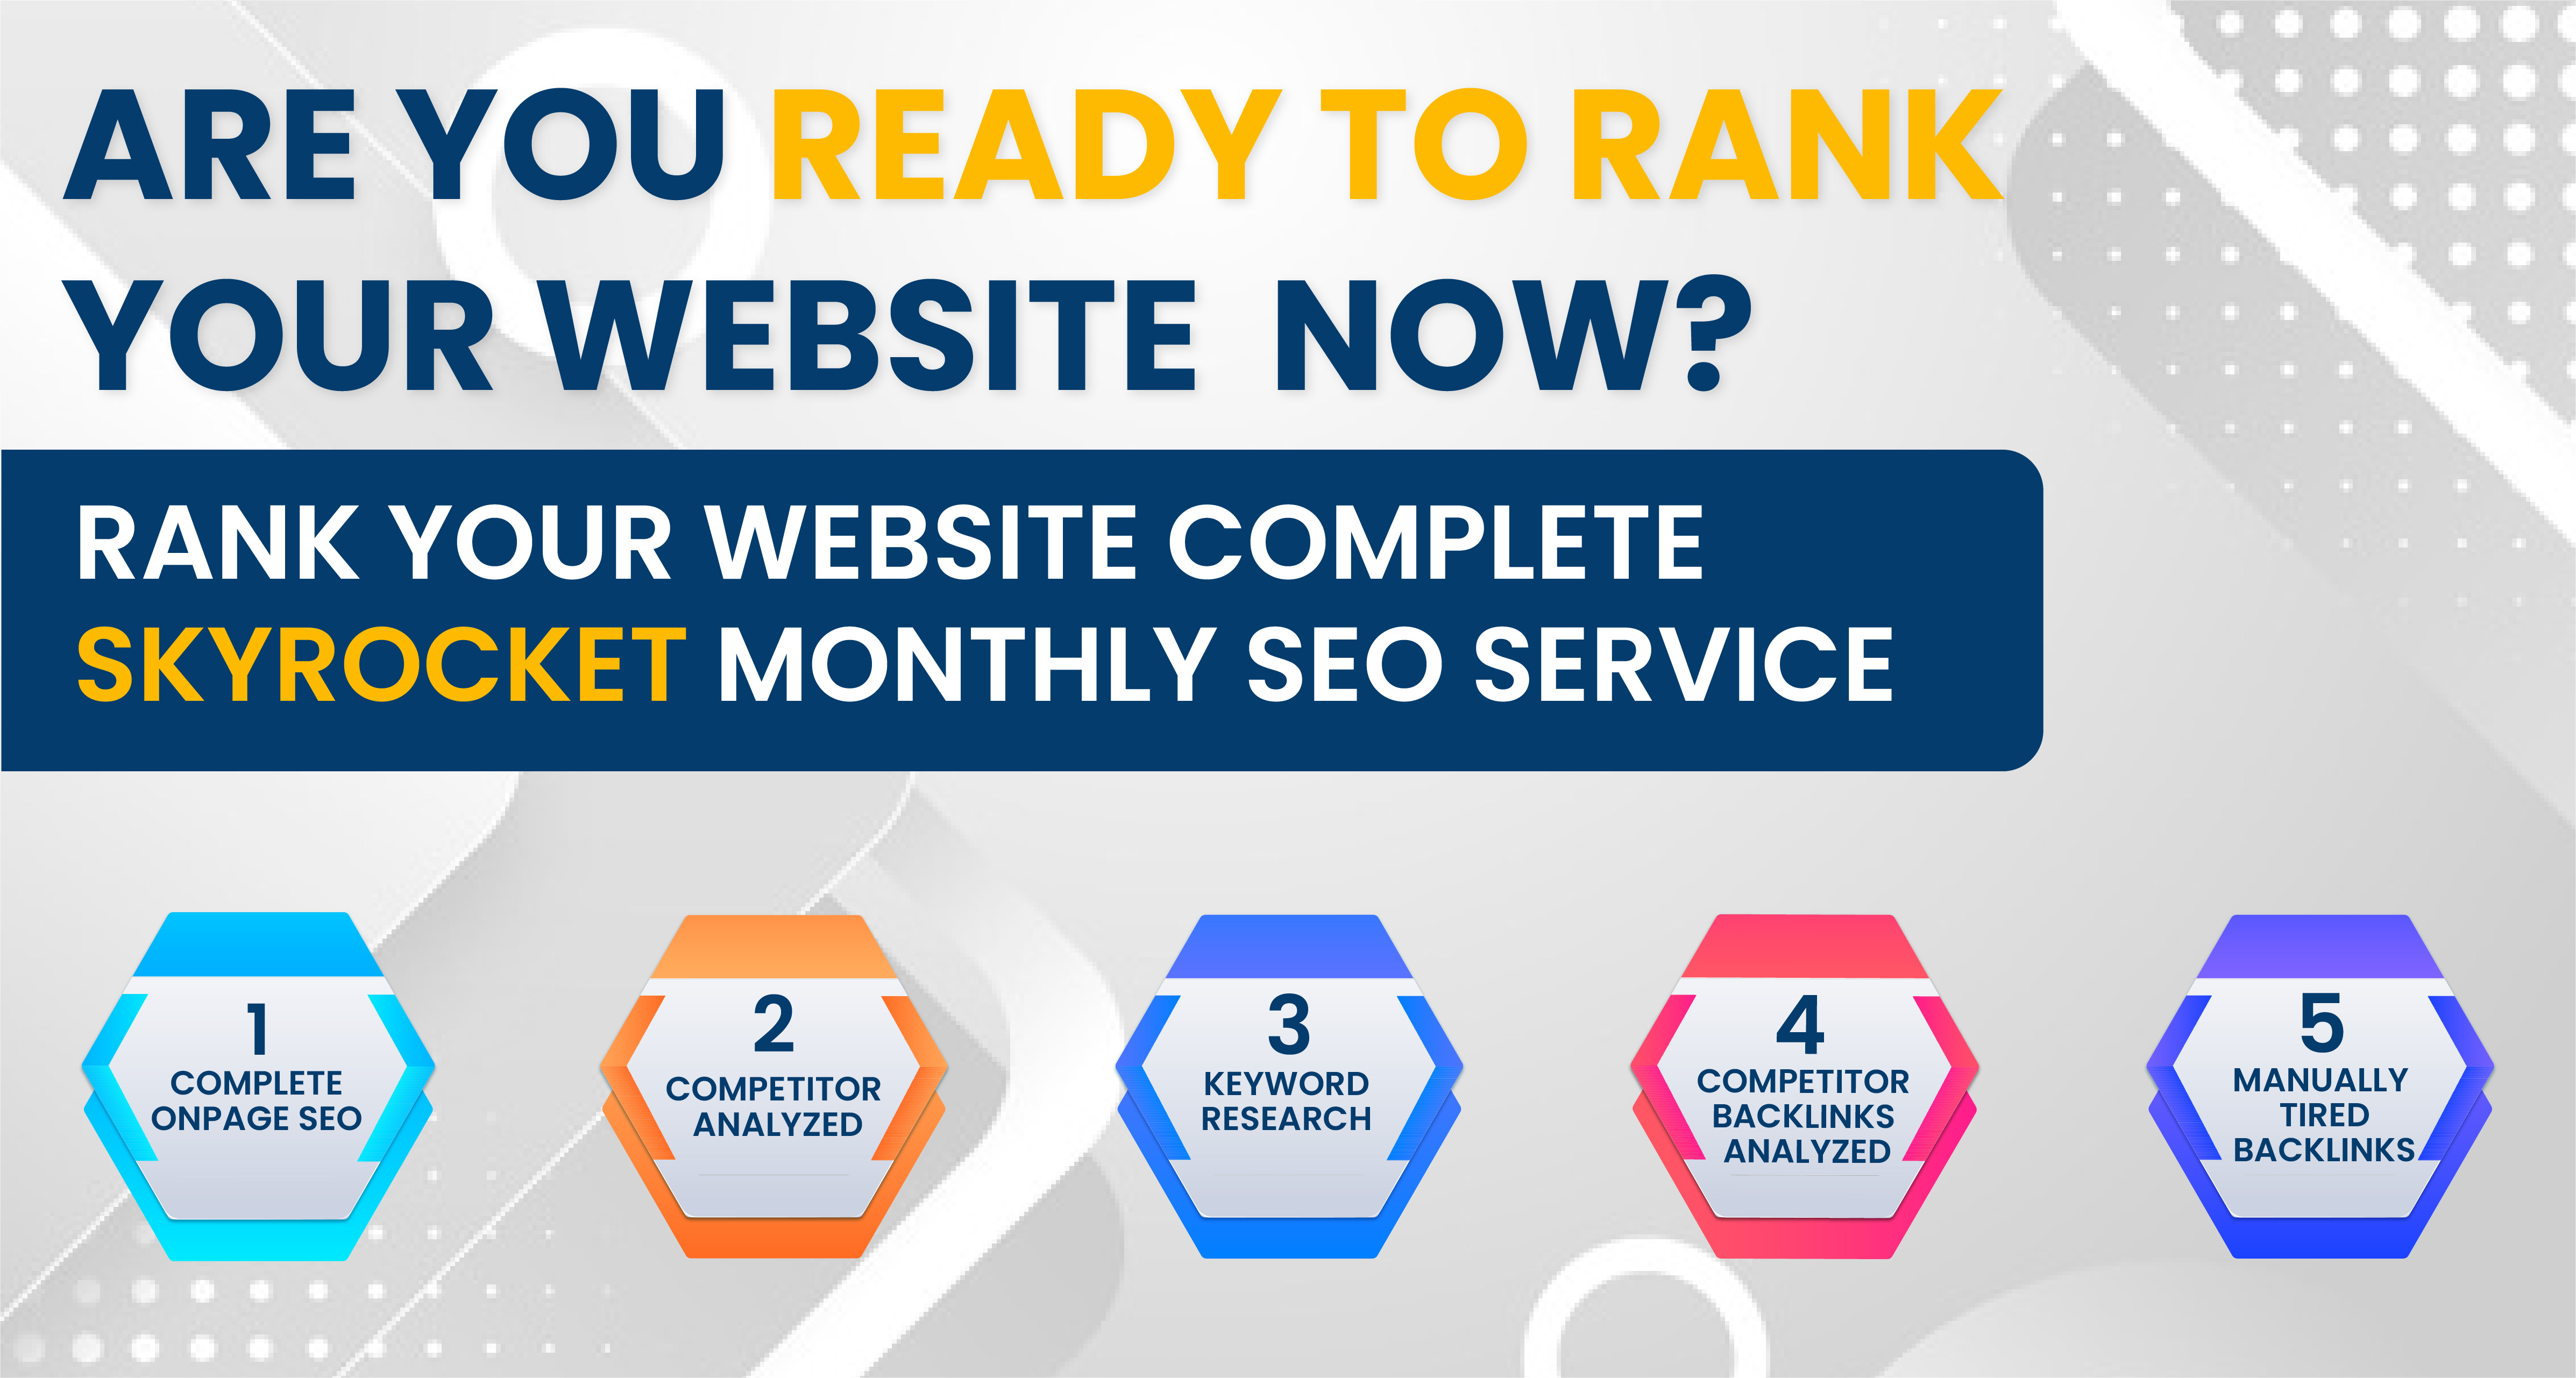 I will rank your site on first page in google complete SEO Service 30 Day Drip feed